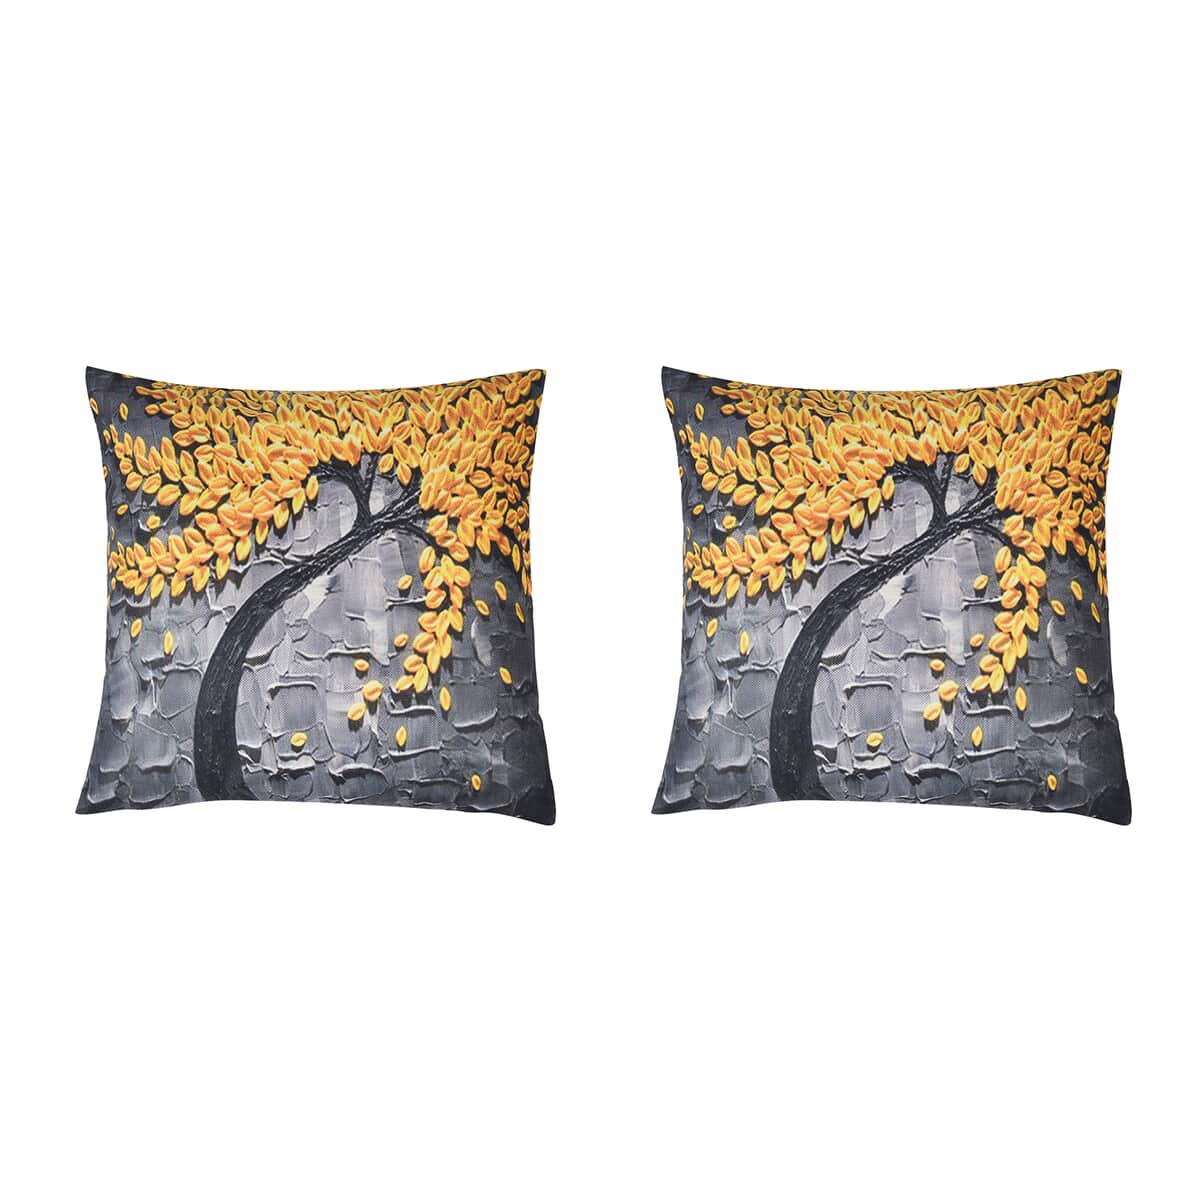 Homesmart Gray & Yellow Floral Tree Pattern 100% Polyester Cushion Cover Set of 2, Wrinkle Resistant Ultra Soft Cushion Cover Set with Zipper Closure image number 0